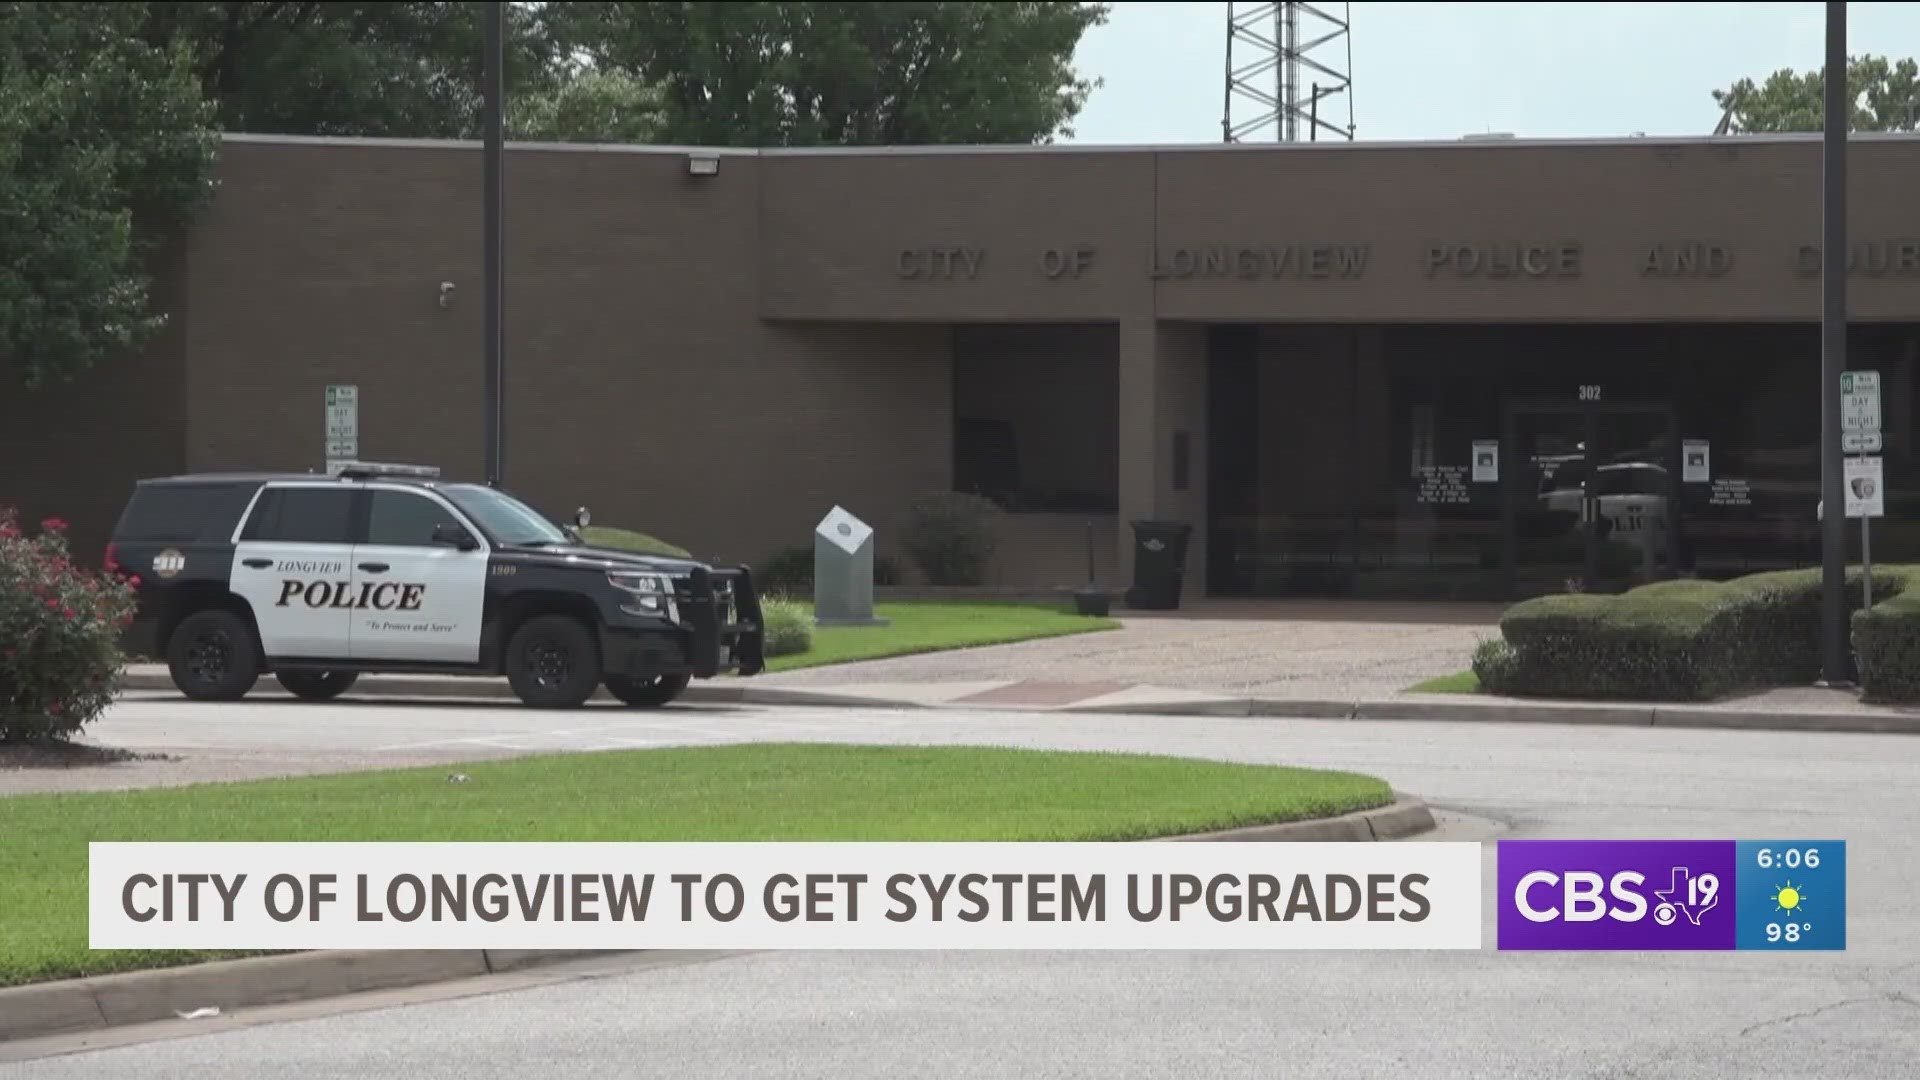 This new system is going to cost $1.6 million and it's a cost the city sees as an investment.